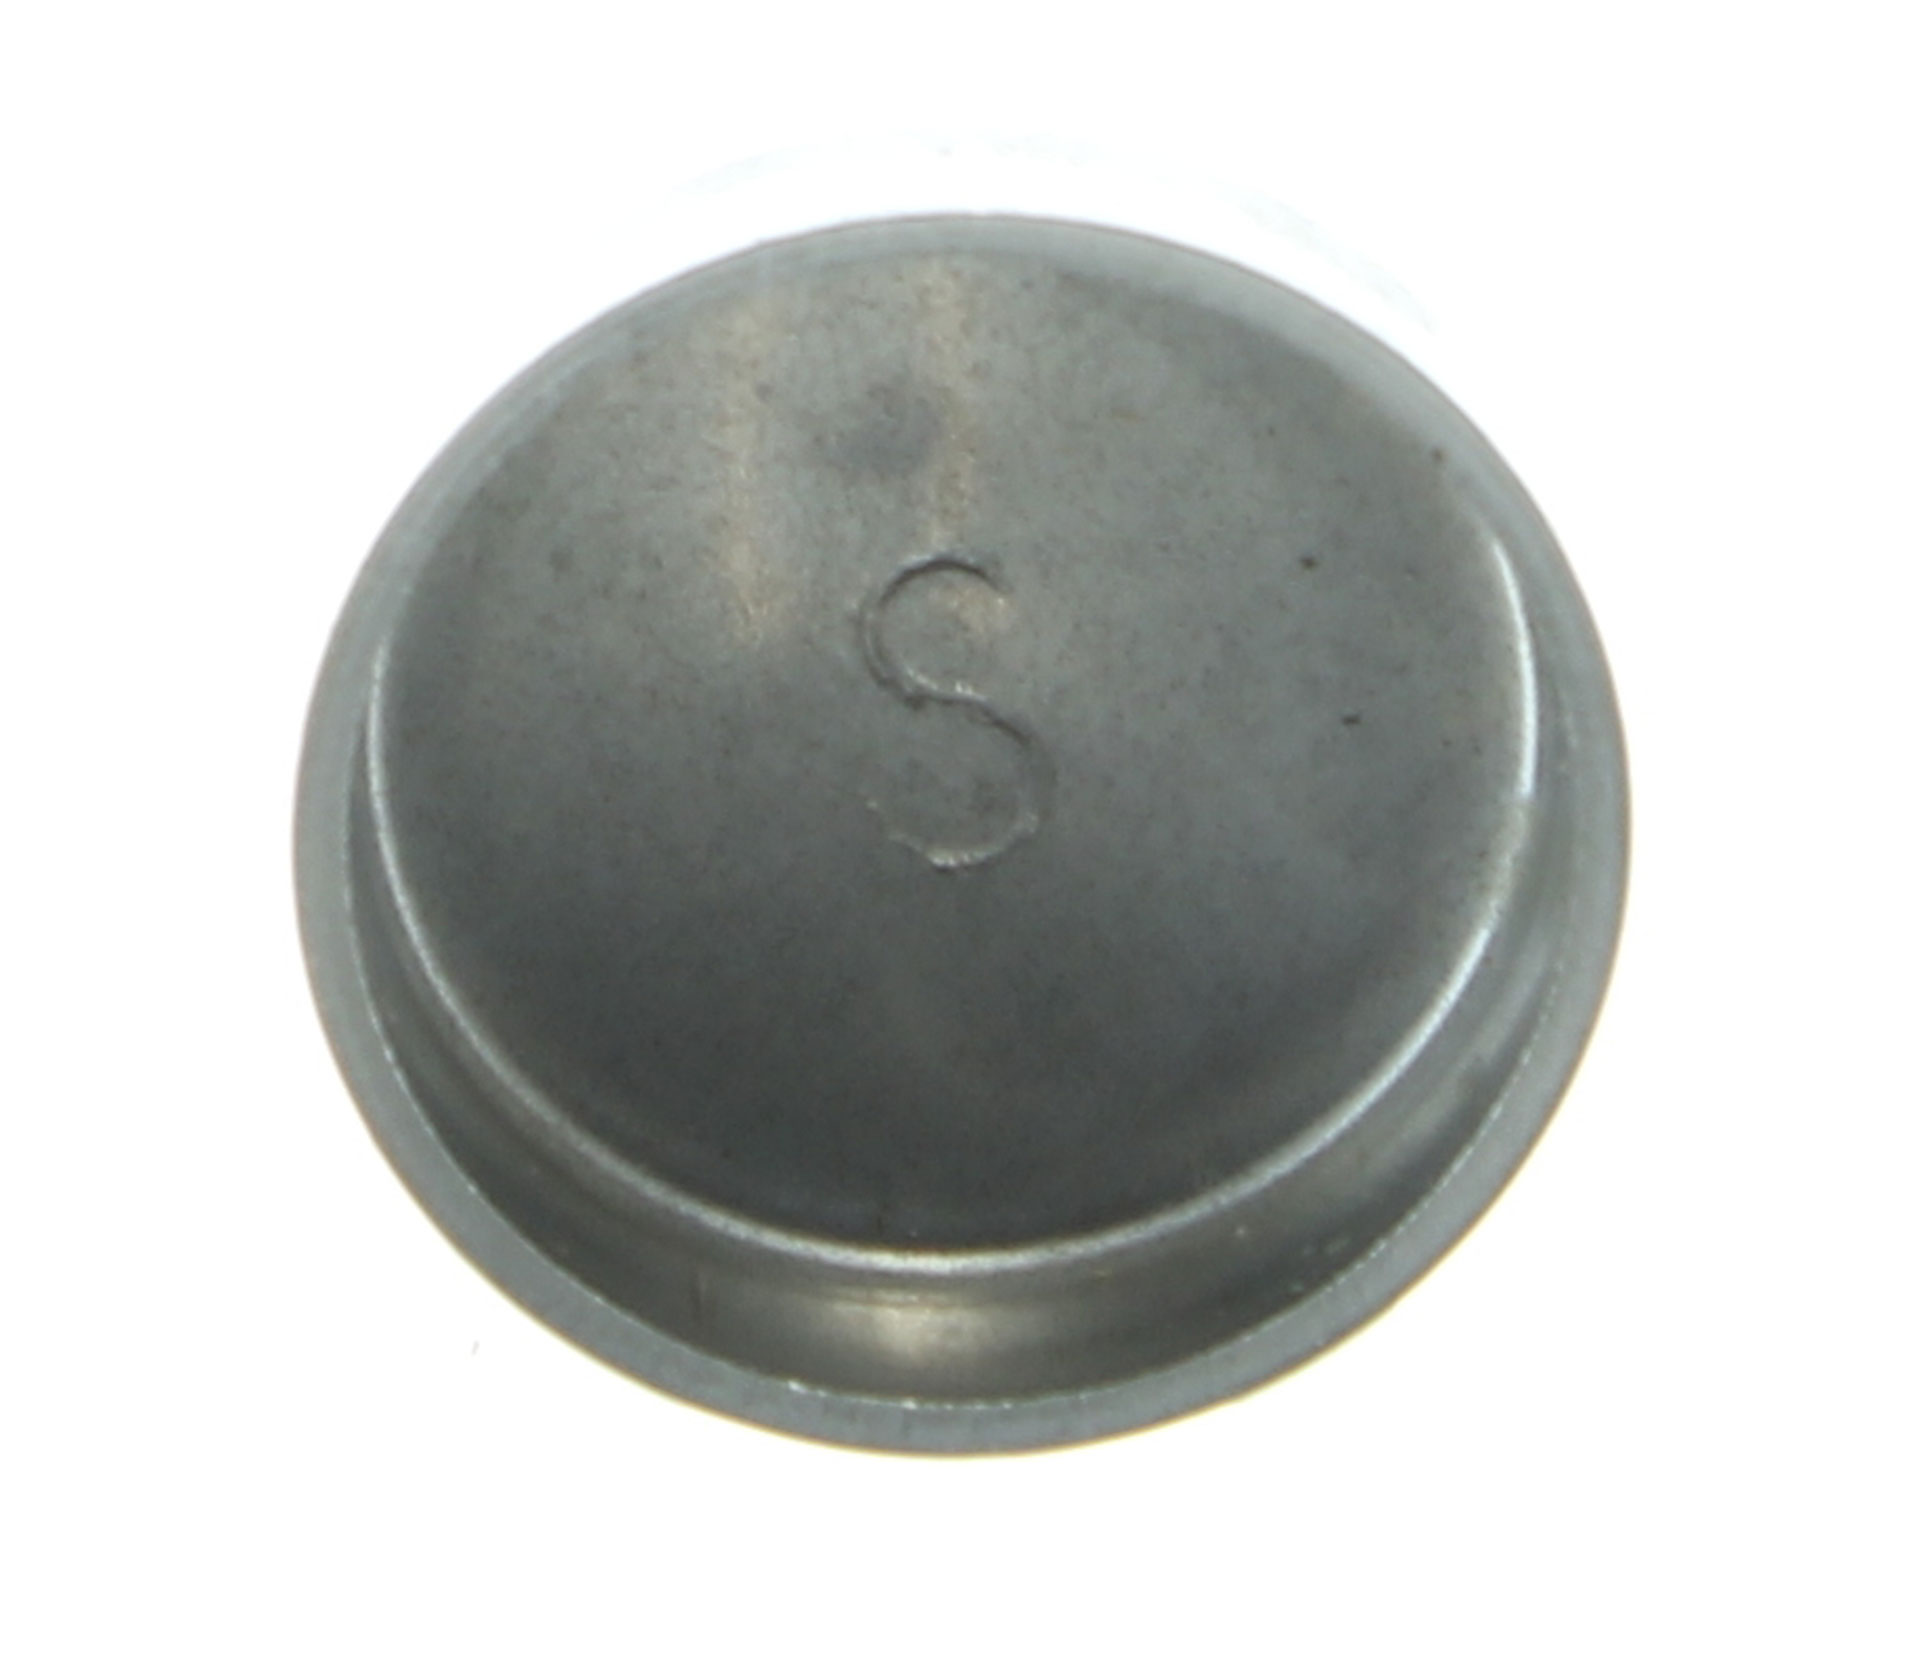 Stainless Steel Freeze Plug - PV05997-03